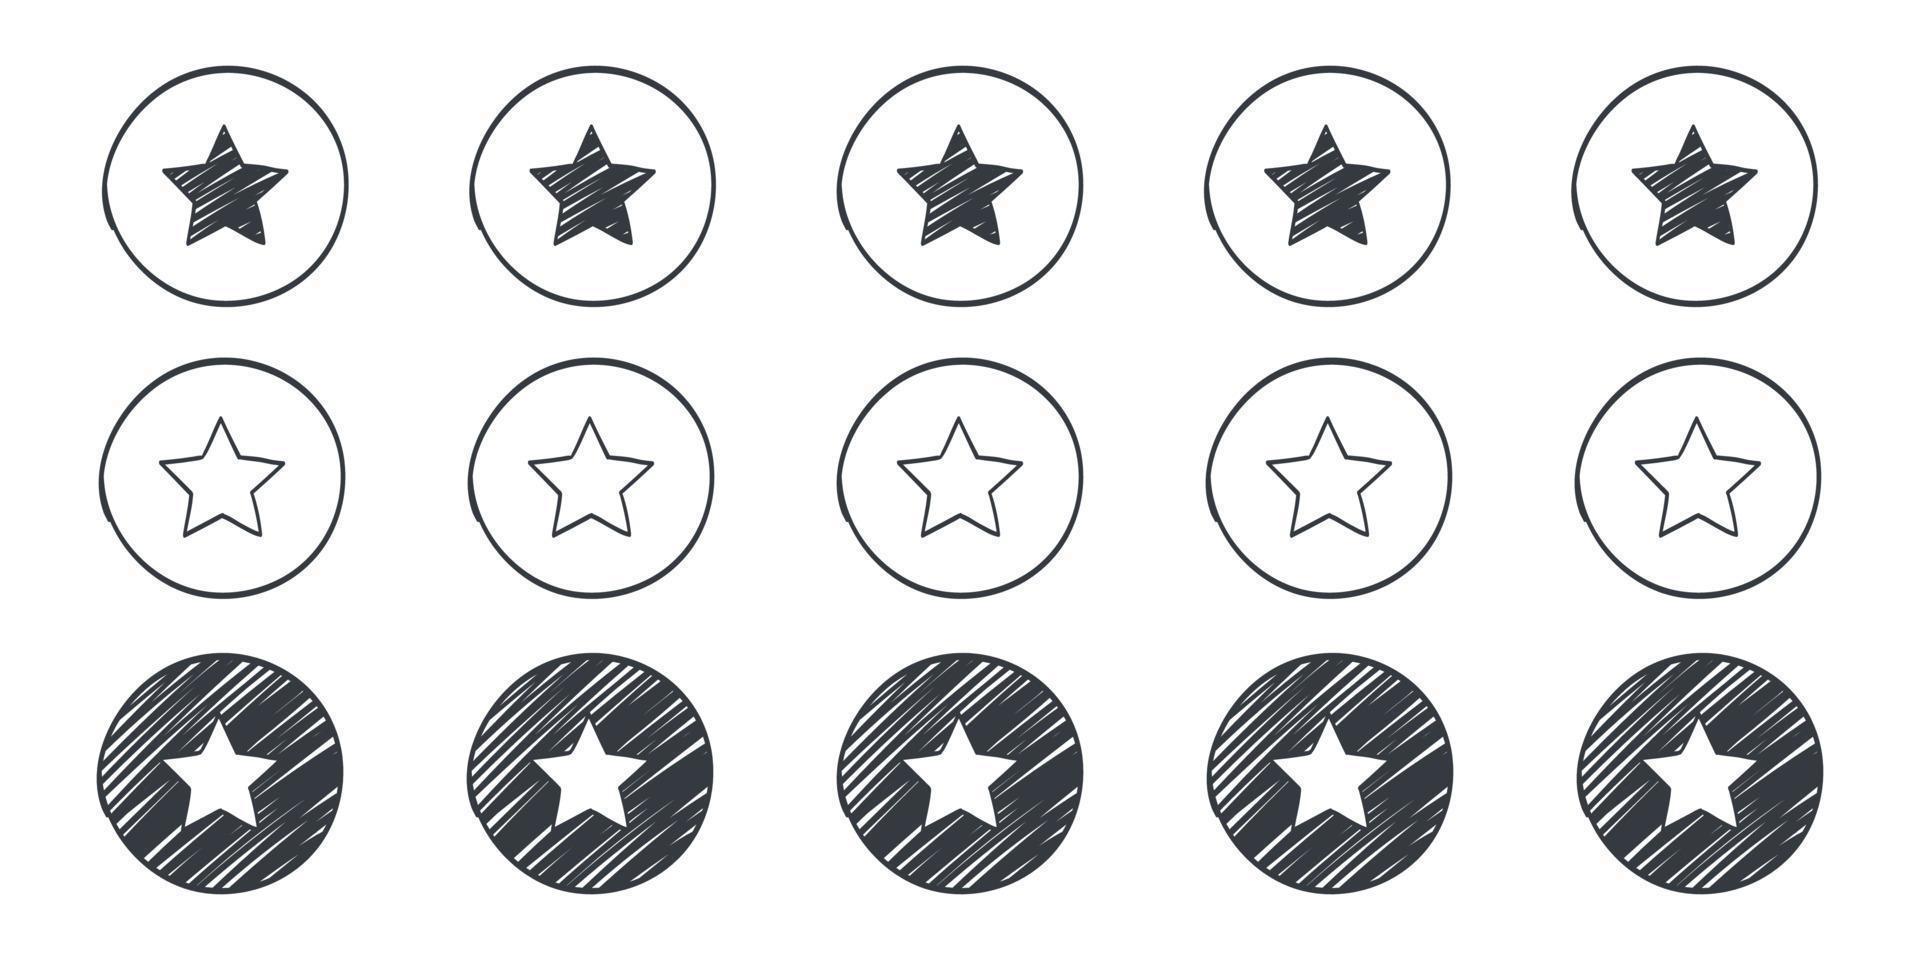 Quality rating signs. Doodle stars icons. Drawn icons of stars. Vector illustration